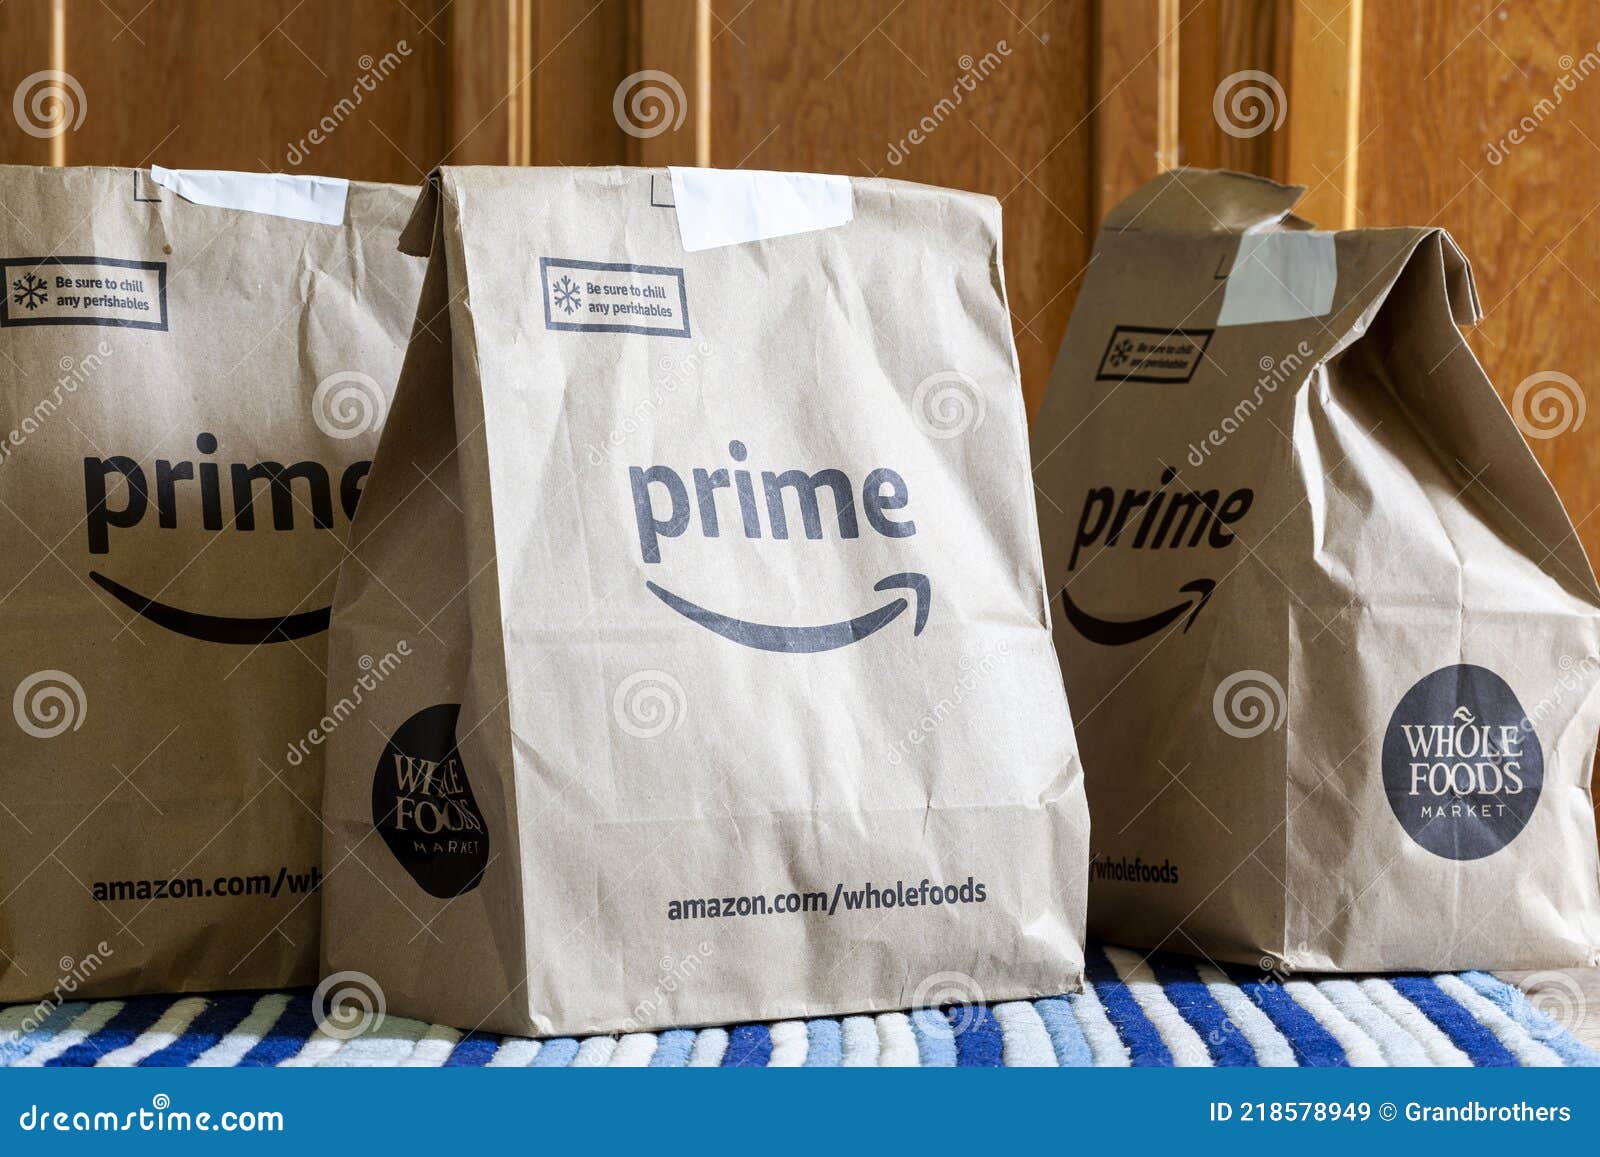 https://thumbs.dreamstime.com/z/amazon-prime-offers-same-day-free-delivery-whole-foods-items-clarksburg-md-usa-three-recycled-paper-grocery-bags-218578949.jpg